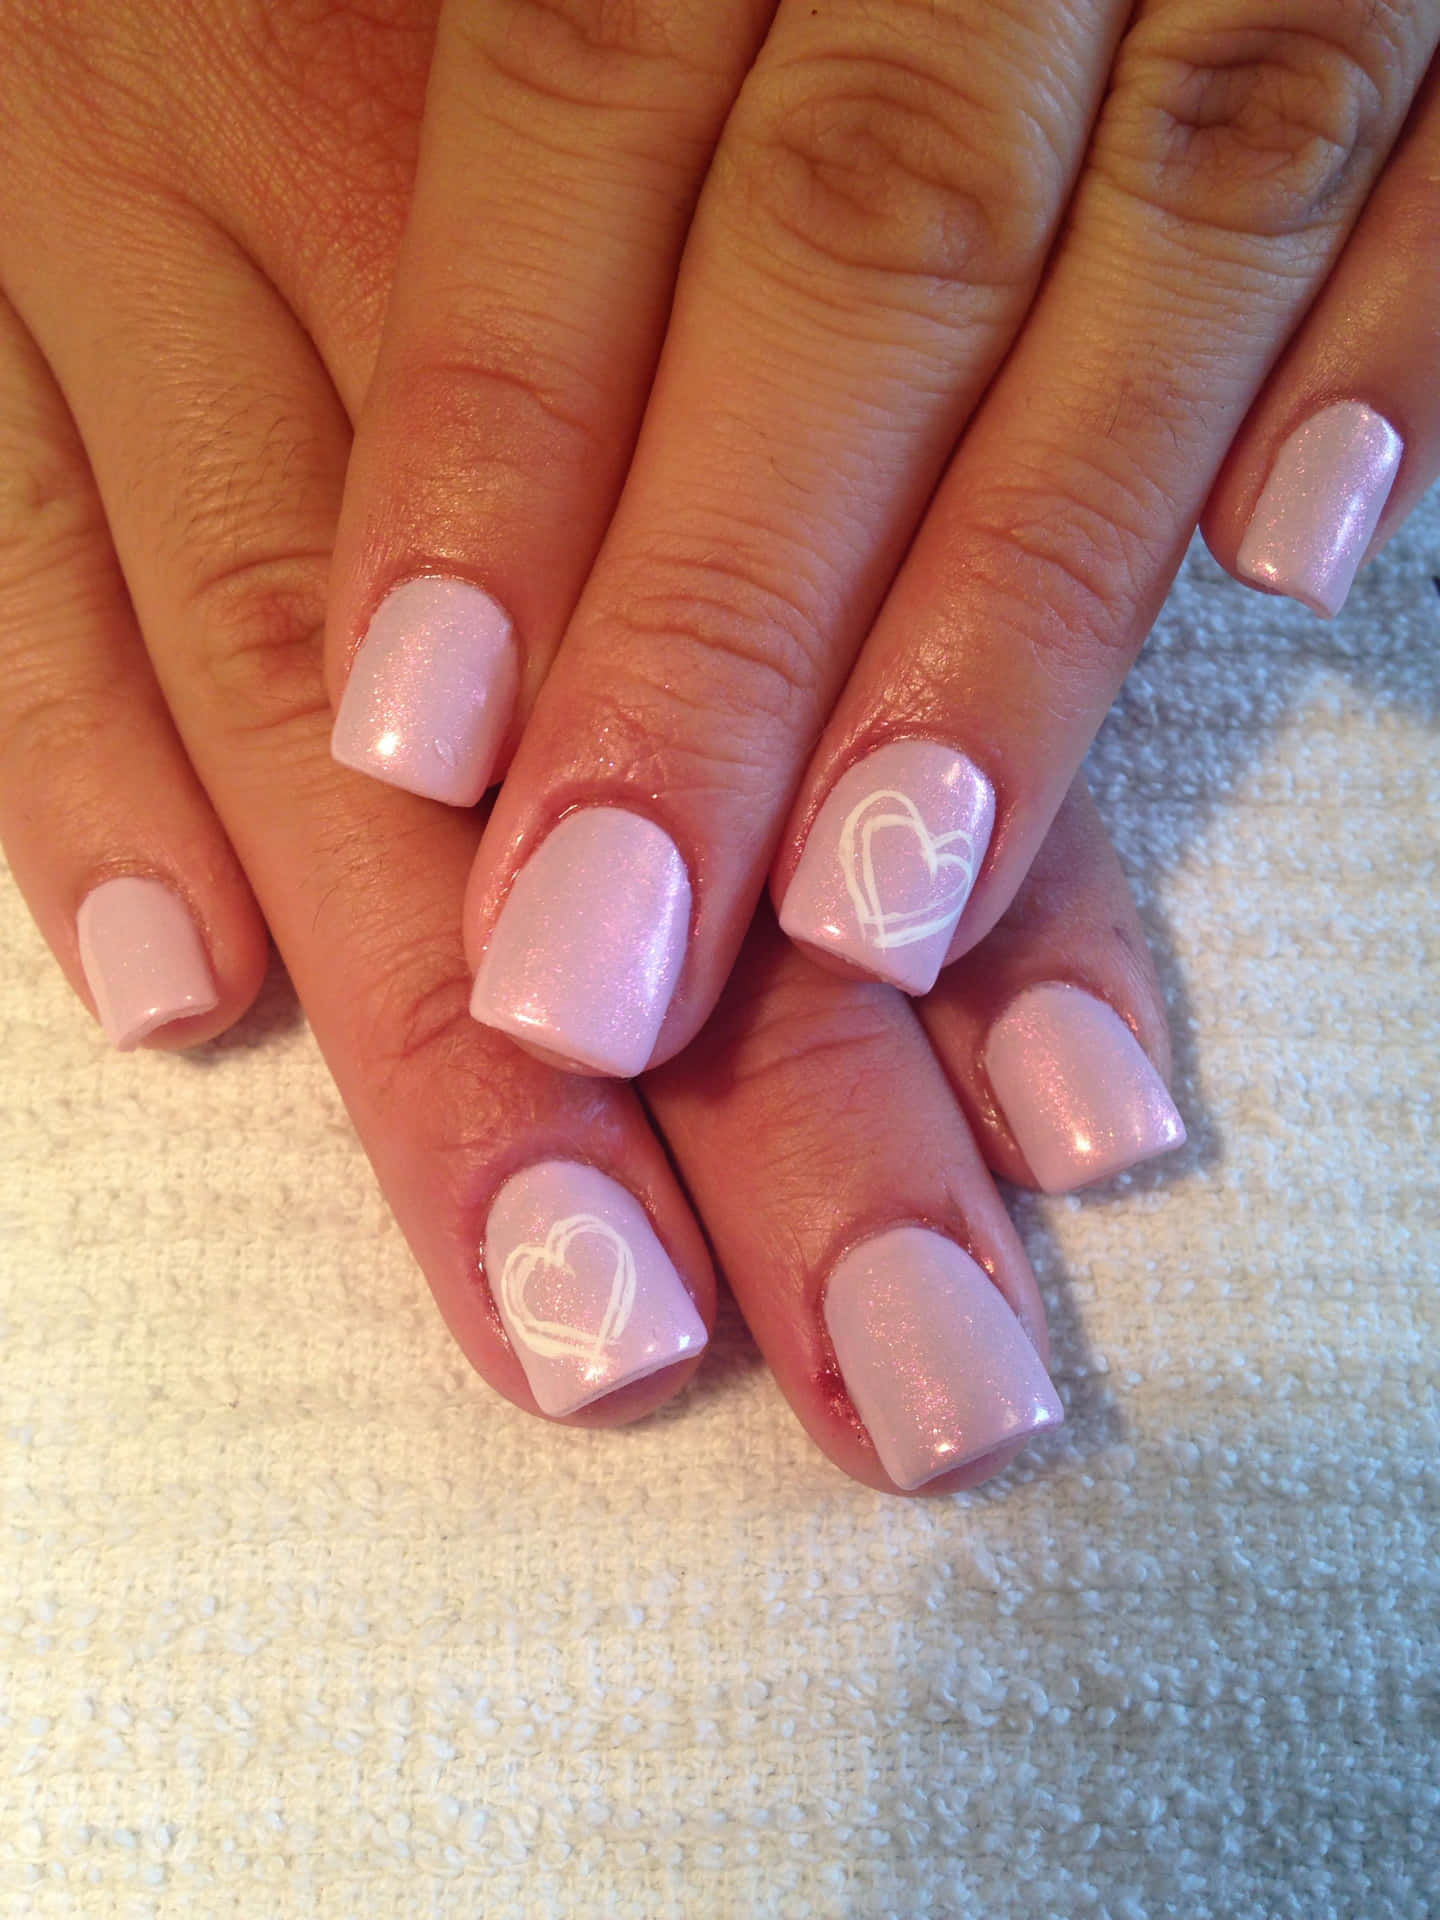 30 Playful Pink Nail Art Designs For Every Occasion : Matte White Pink Tips